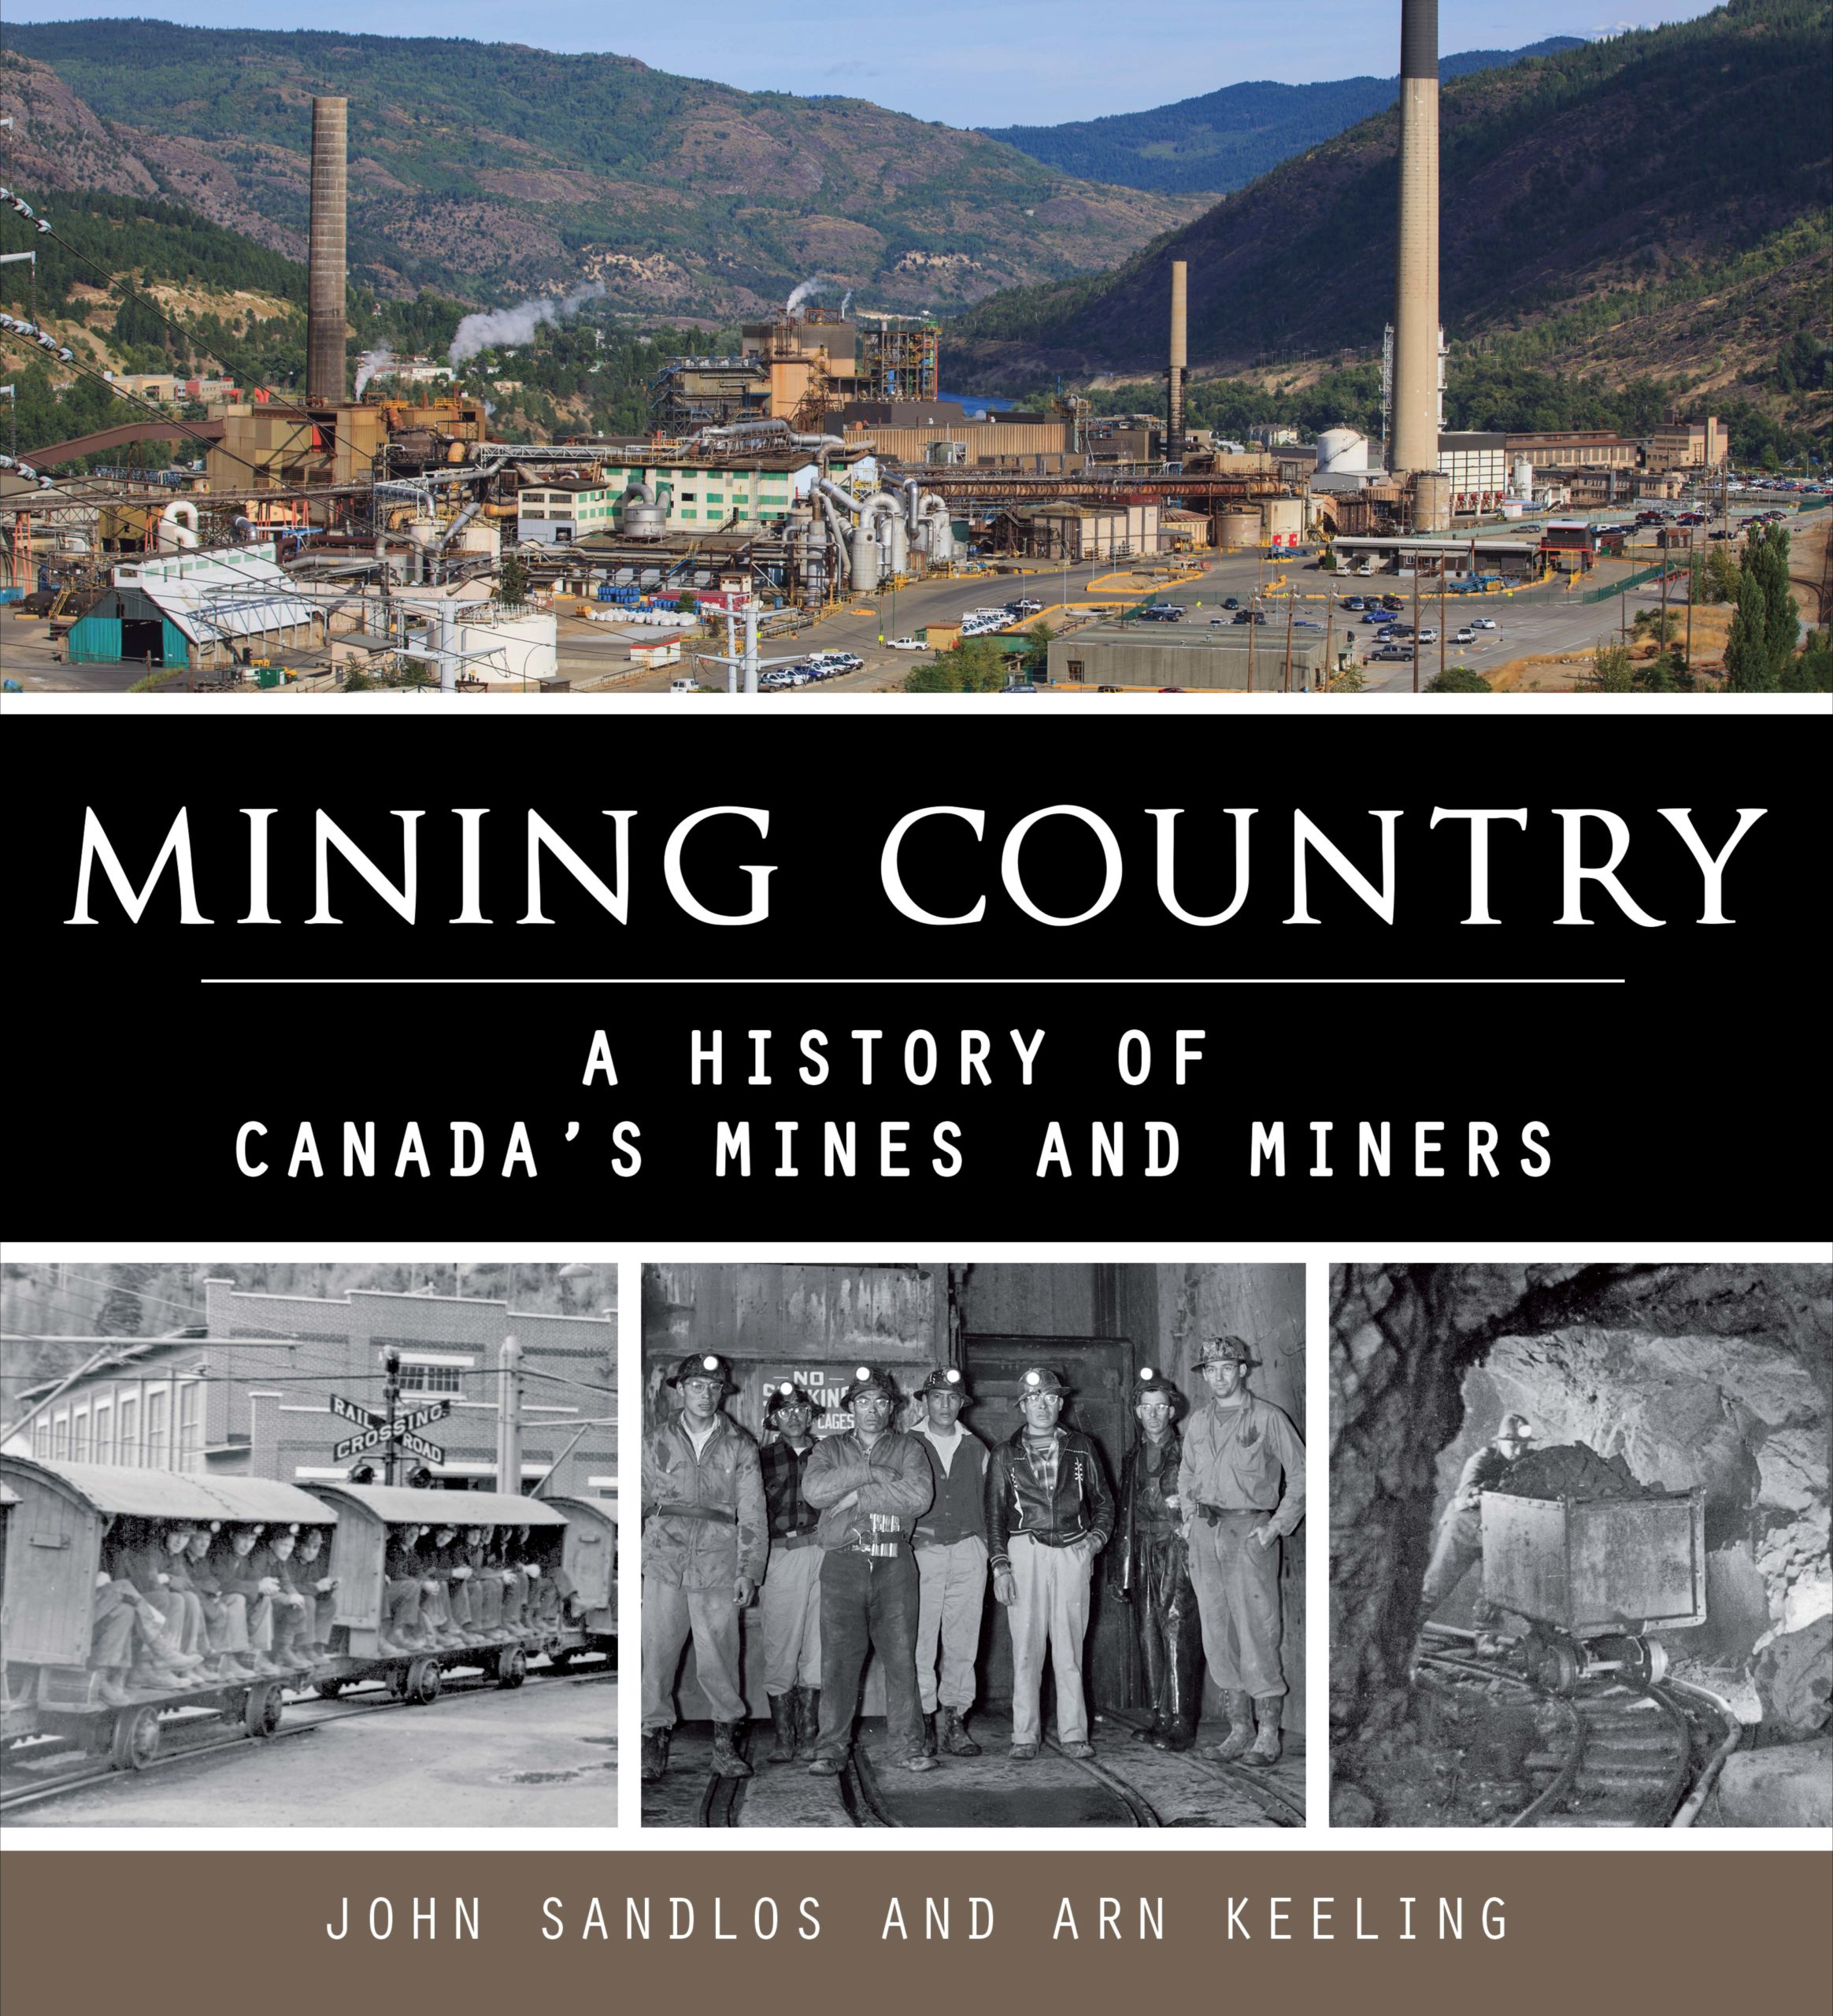 Image Mining country : a history of Canada's mines and miners